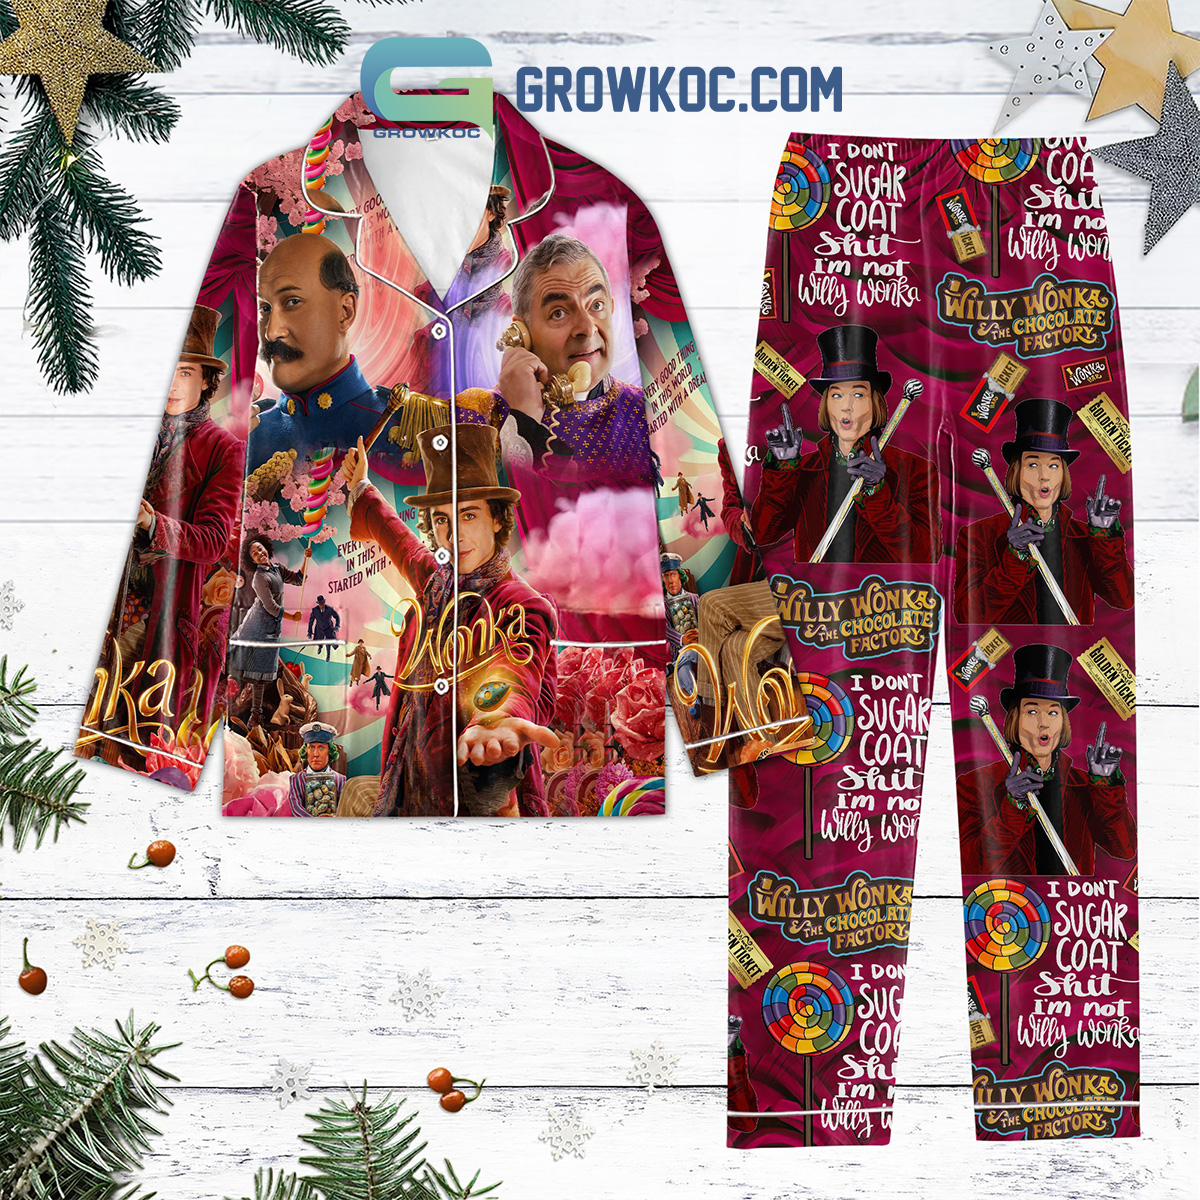 Willy Wonka And The Chocolate Factory I Don't Sugar Coat Shit I'm Not Willy Wonka Golden Ticket Christmas Silk Pajamas Set